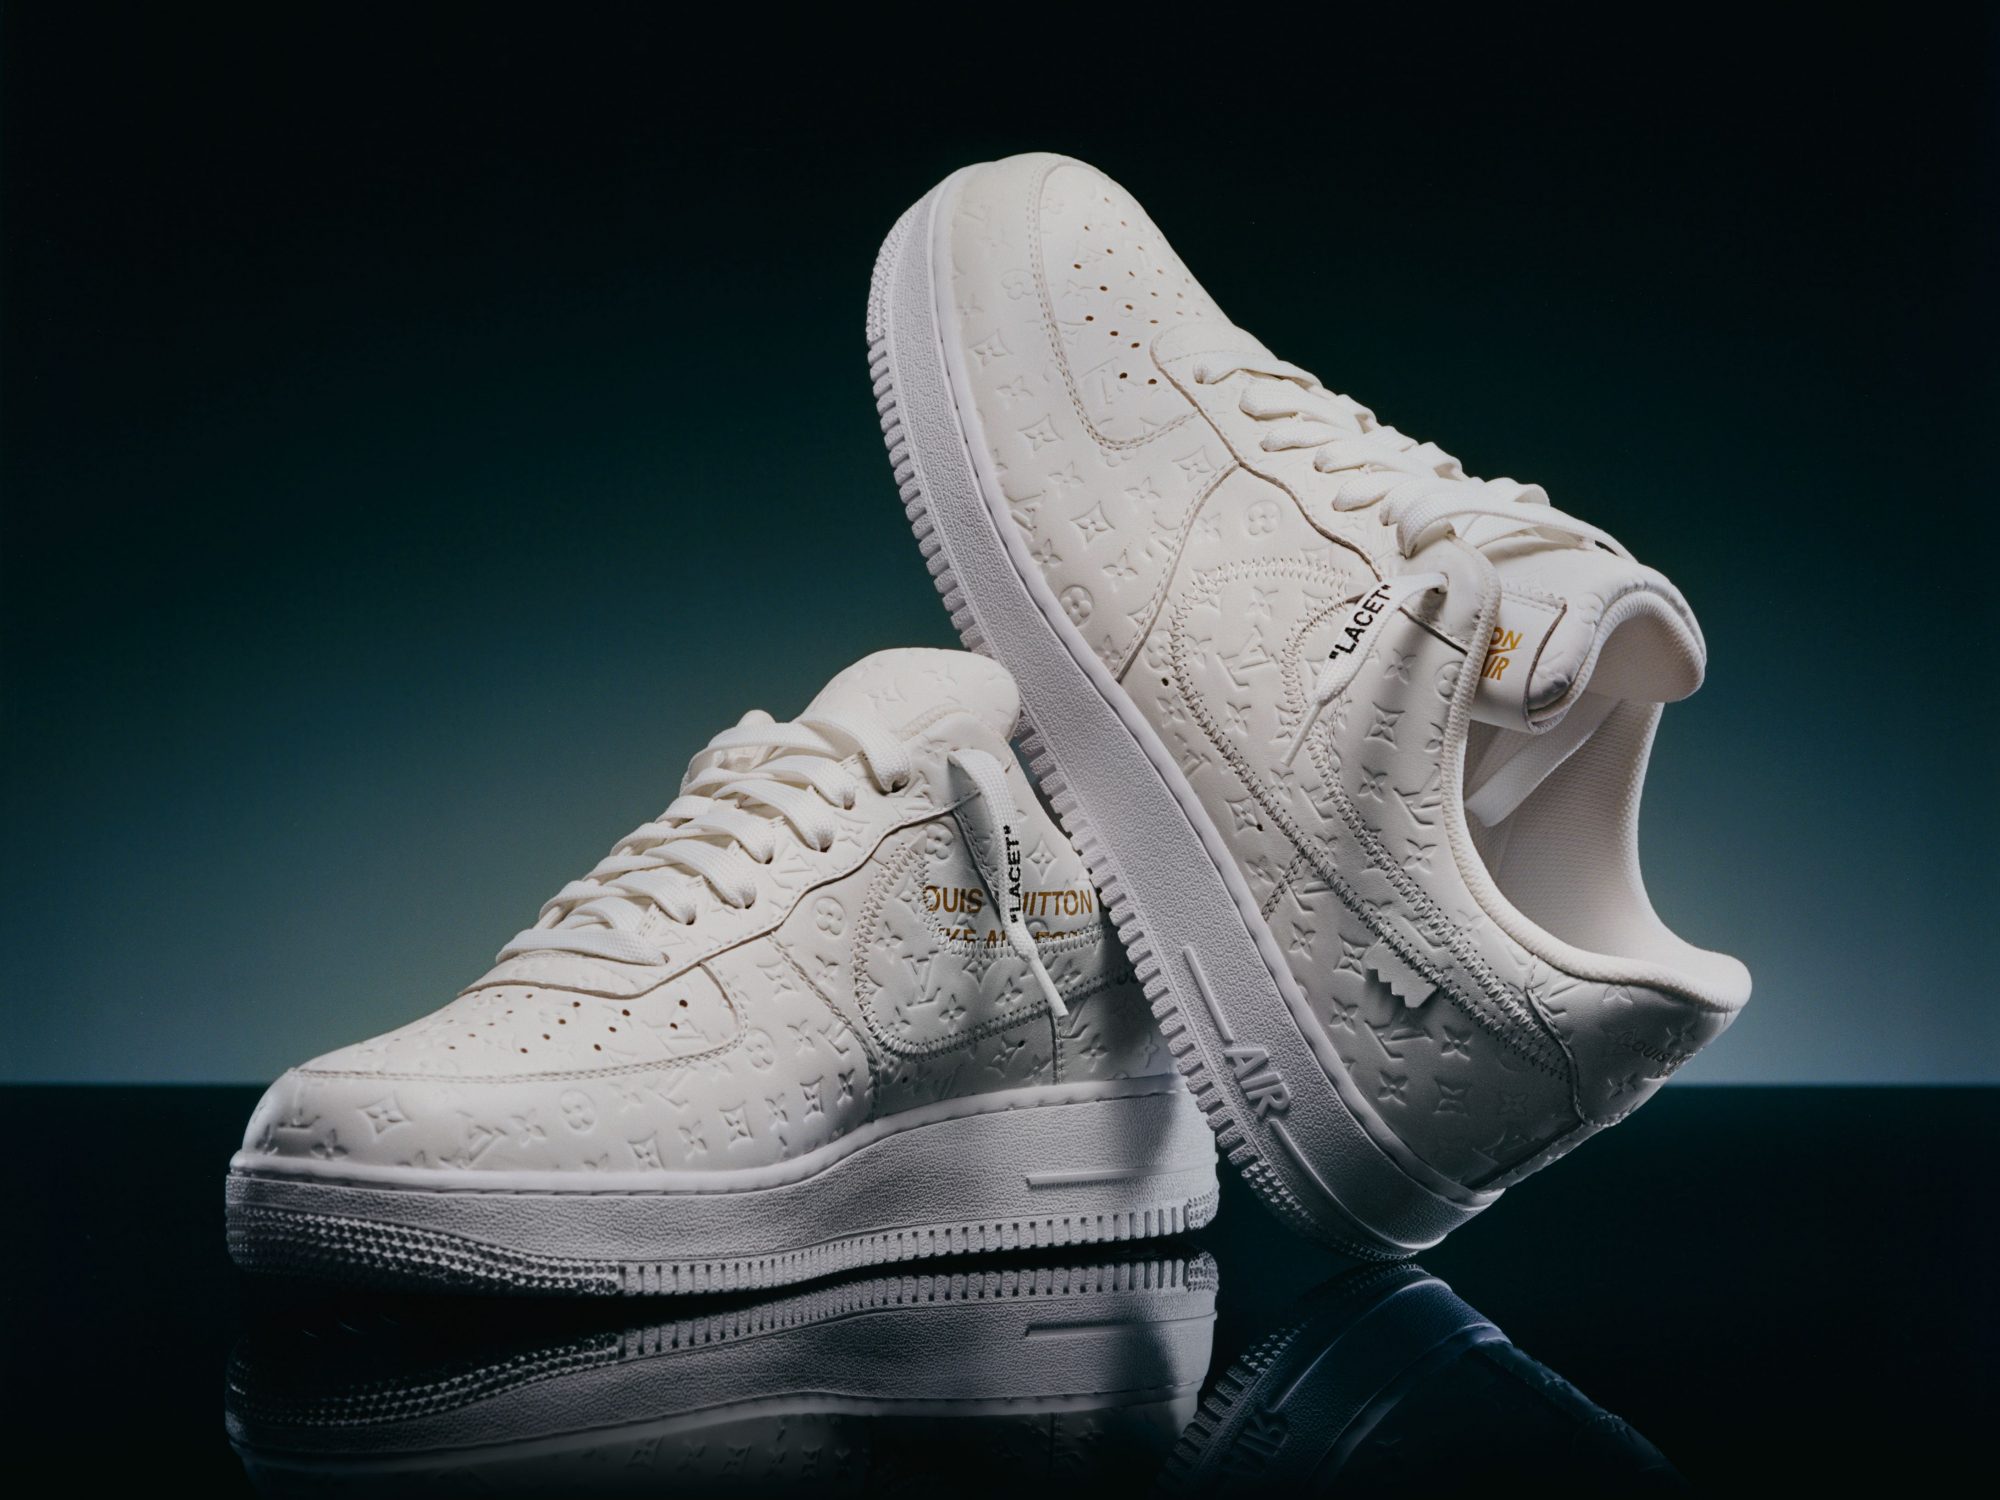 Louis Vuitton x Nike Air Force 1s Sell for a Total of $25.3